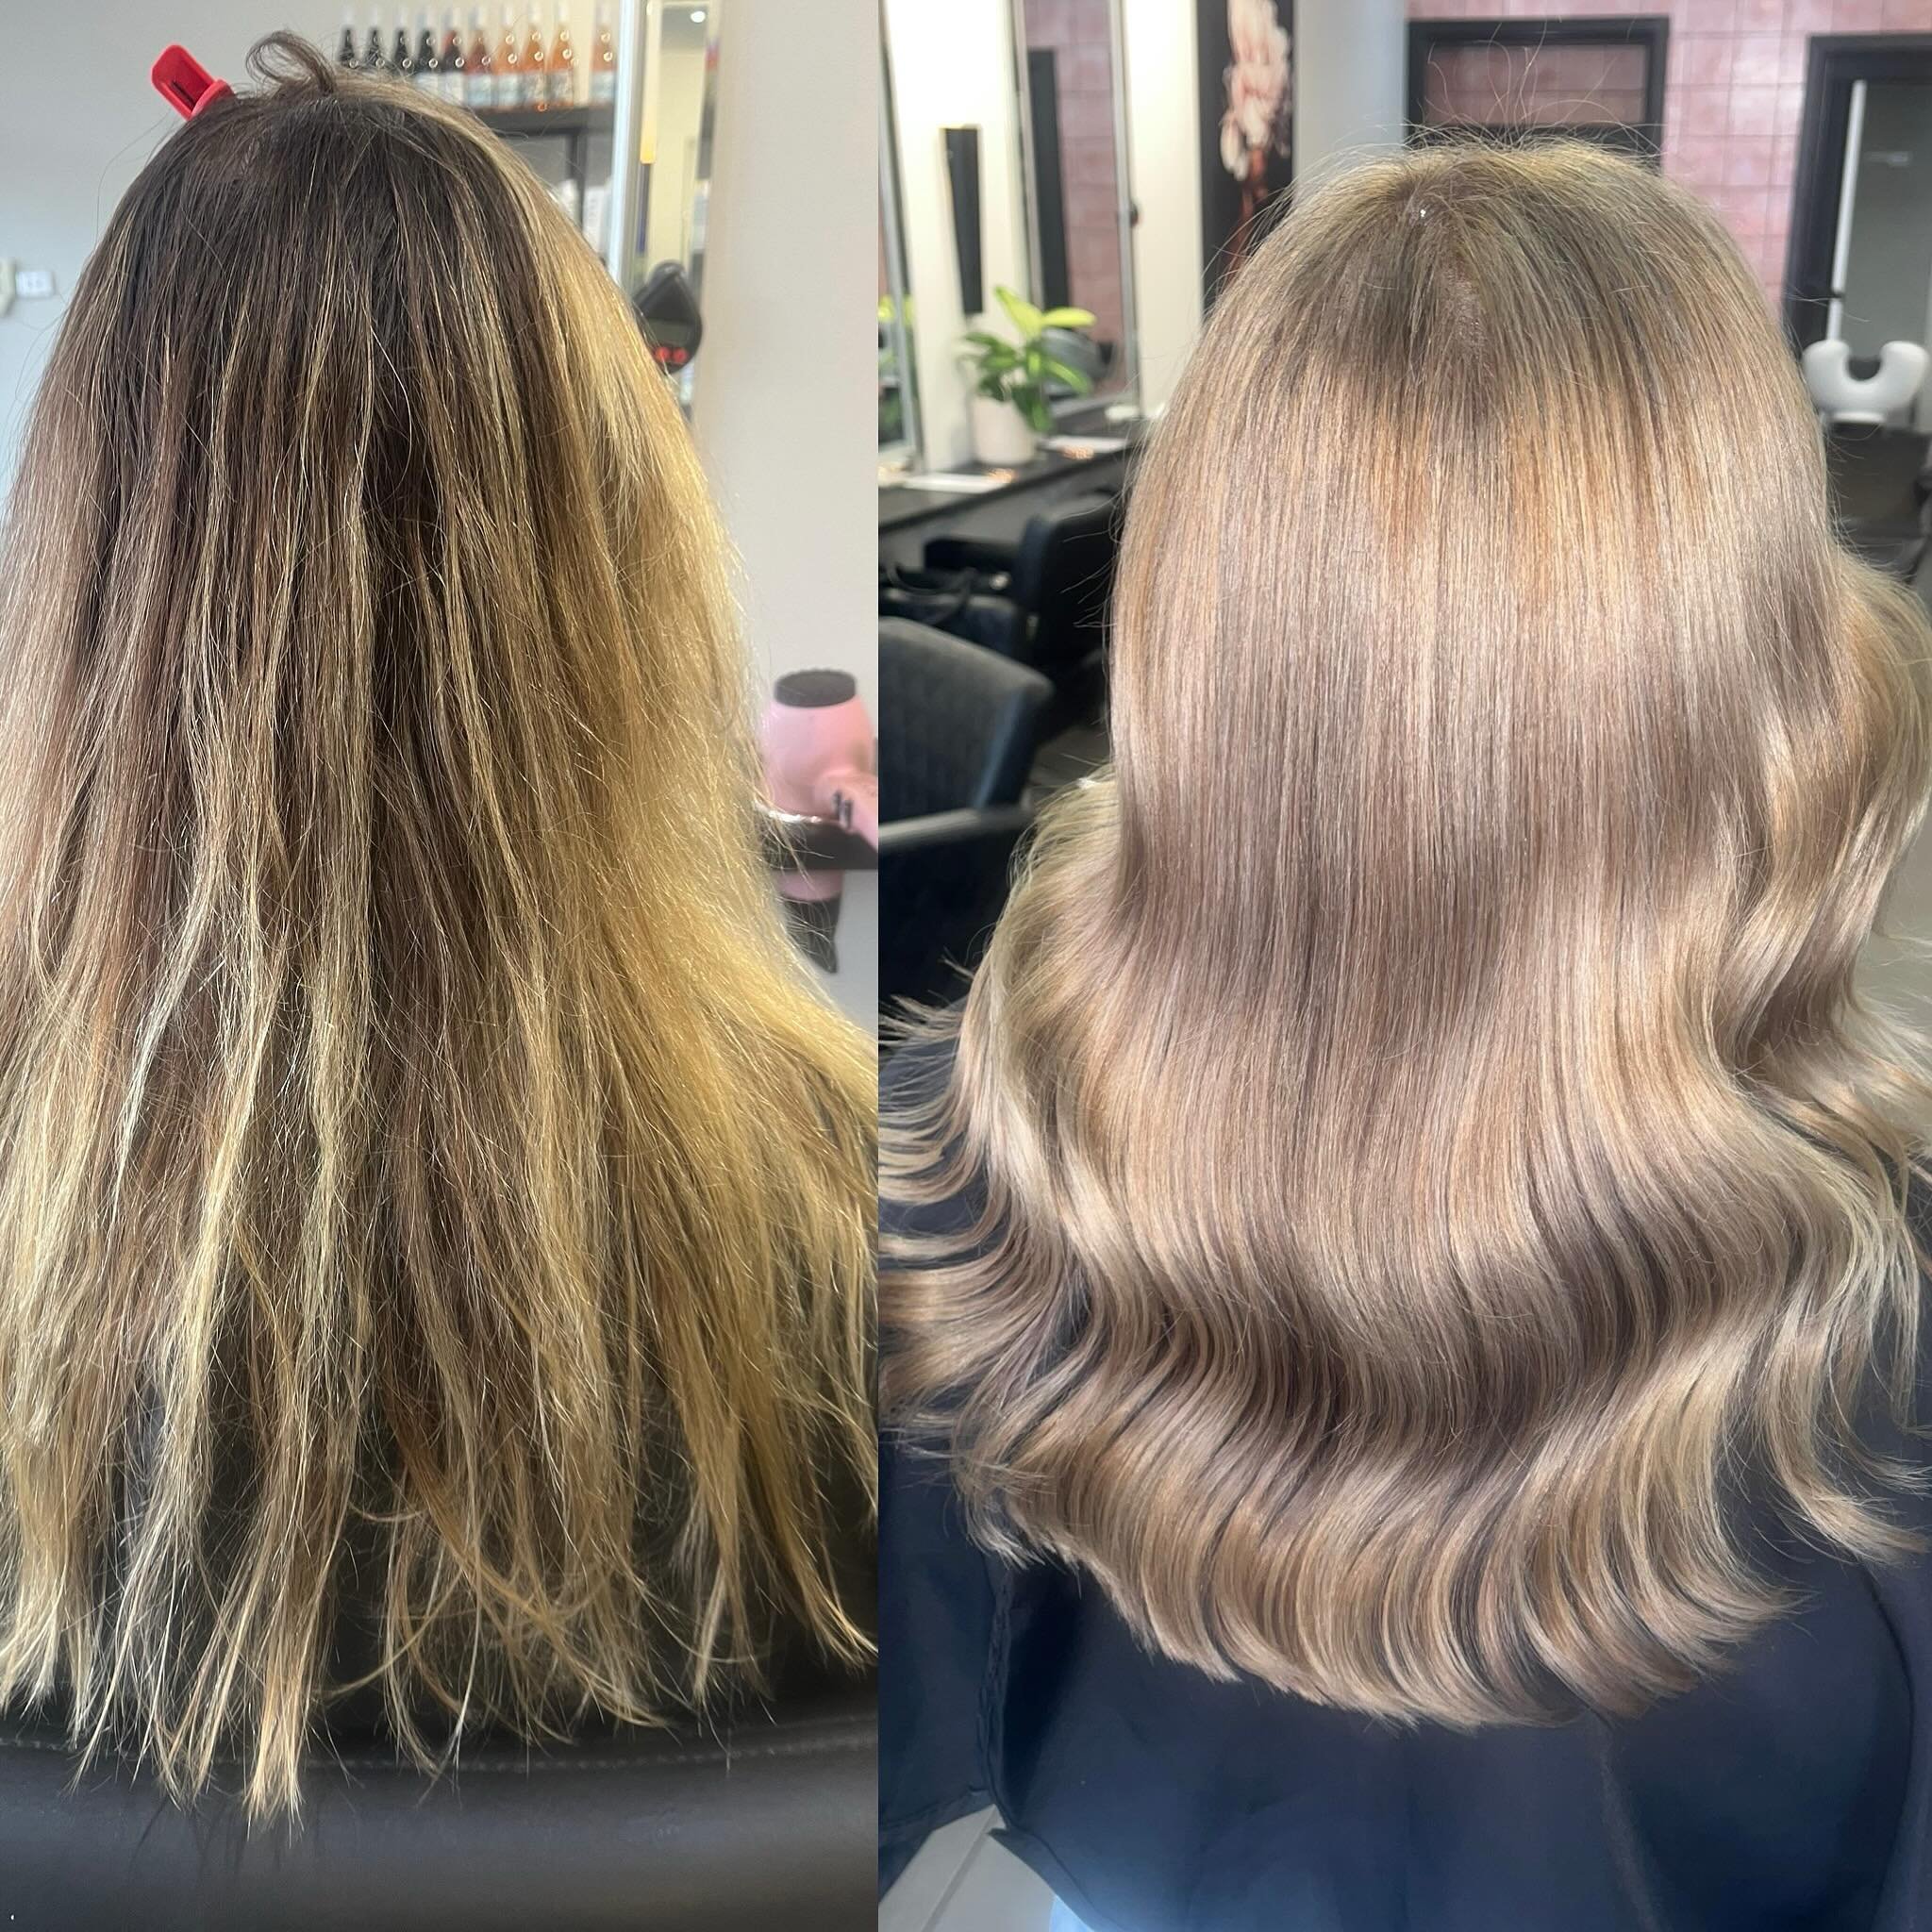 Dull and overgrown to shiny and pearlescent we used @pravana.australia @evolvehairconcepts to create this look we did fine weave back to back foils using ultra lightener and 20 vol on roots toned with 20g beige 20g sand 5g violet express tones hair b